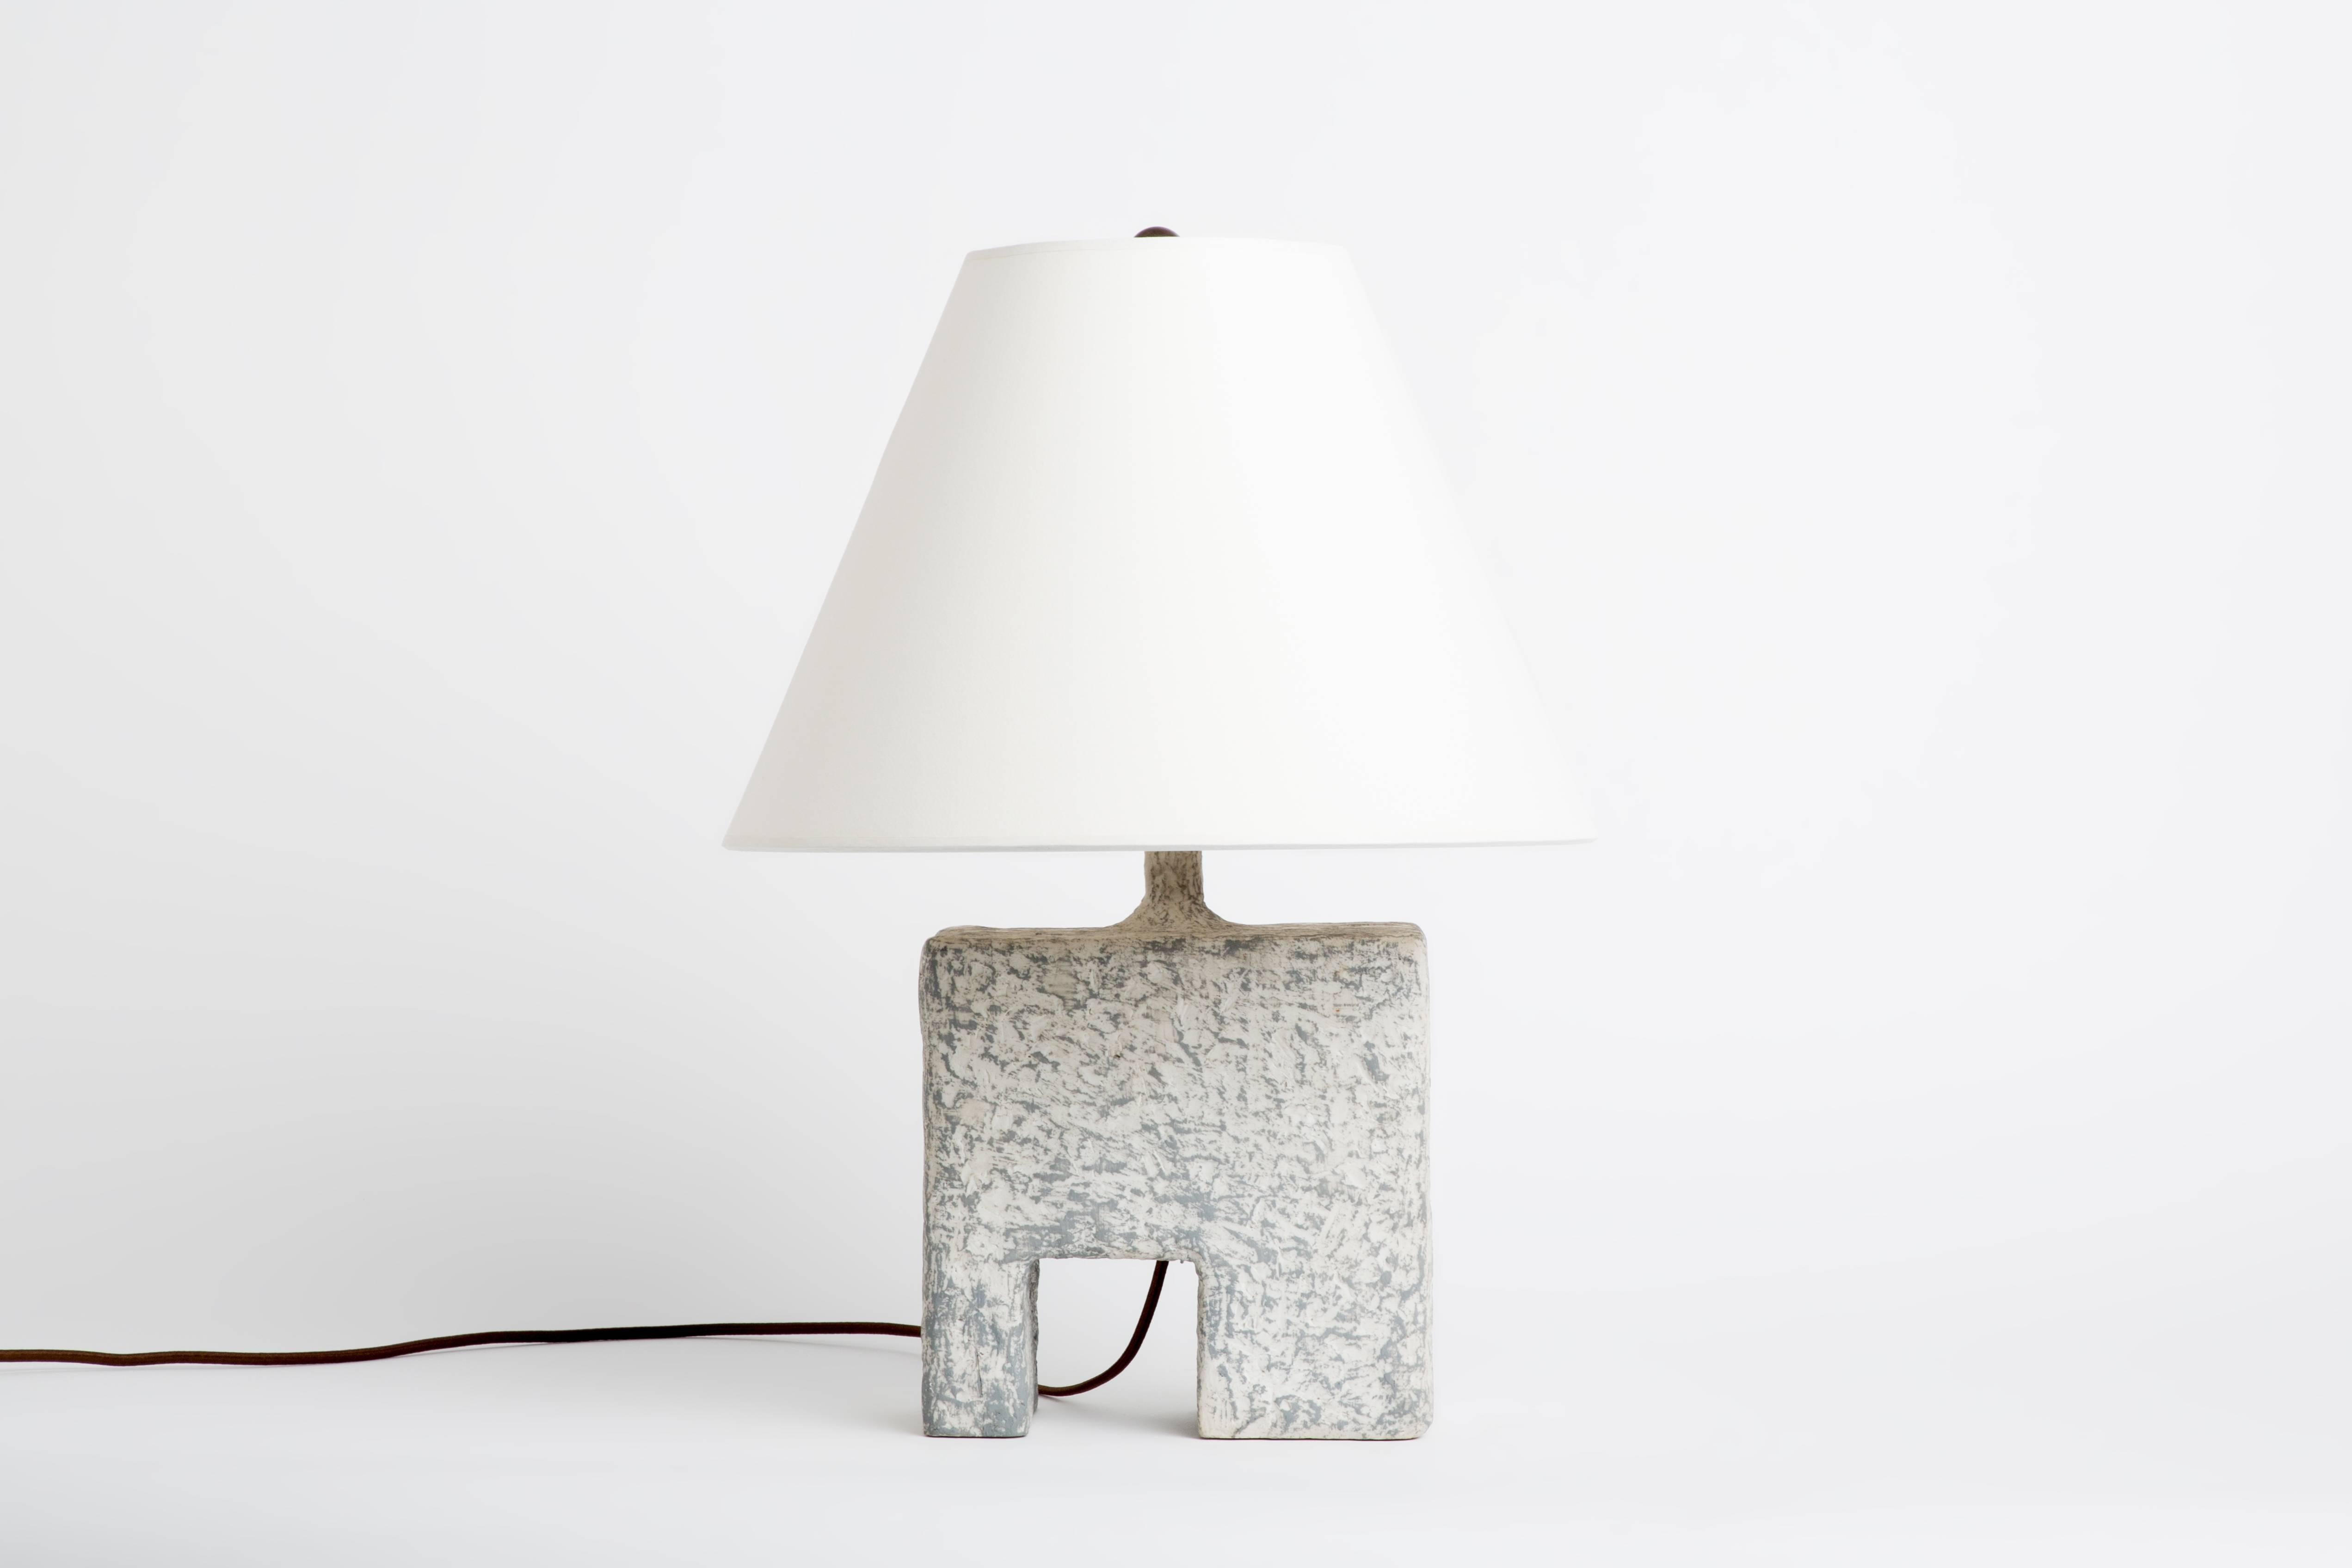 This lamp is 1 of 5 lamps of Dolatowski's cast resin table lamp series. This resin lamp is organic, modeled and textured in form. 

Wired to US standards. Shade is not included. 

Influenced by his travels in Asia and the Middle East, Dolatowski’s